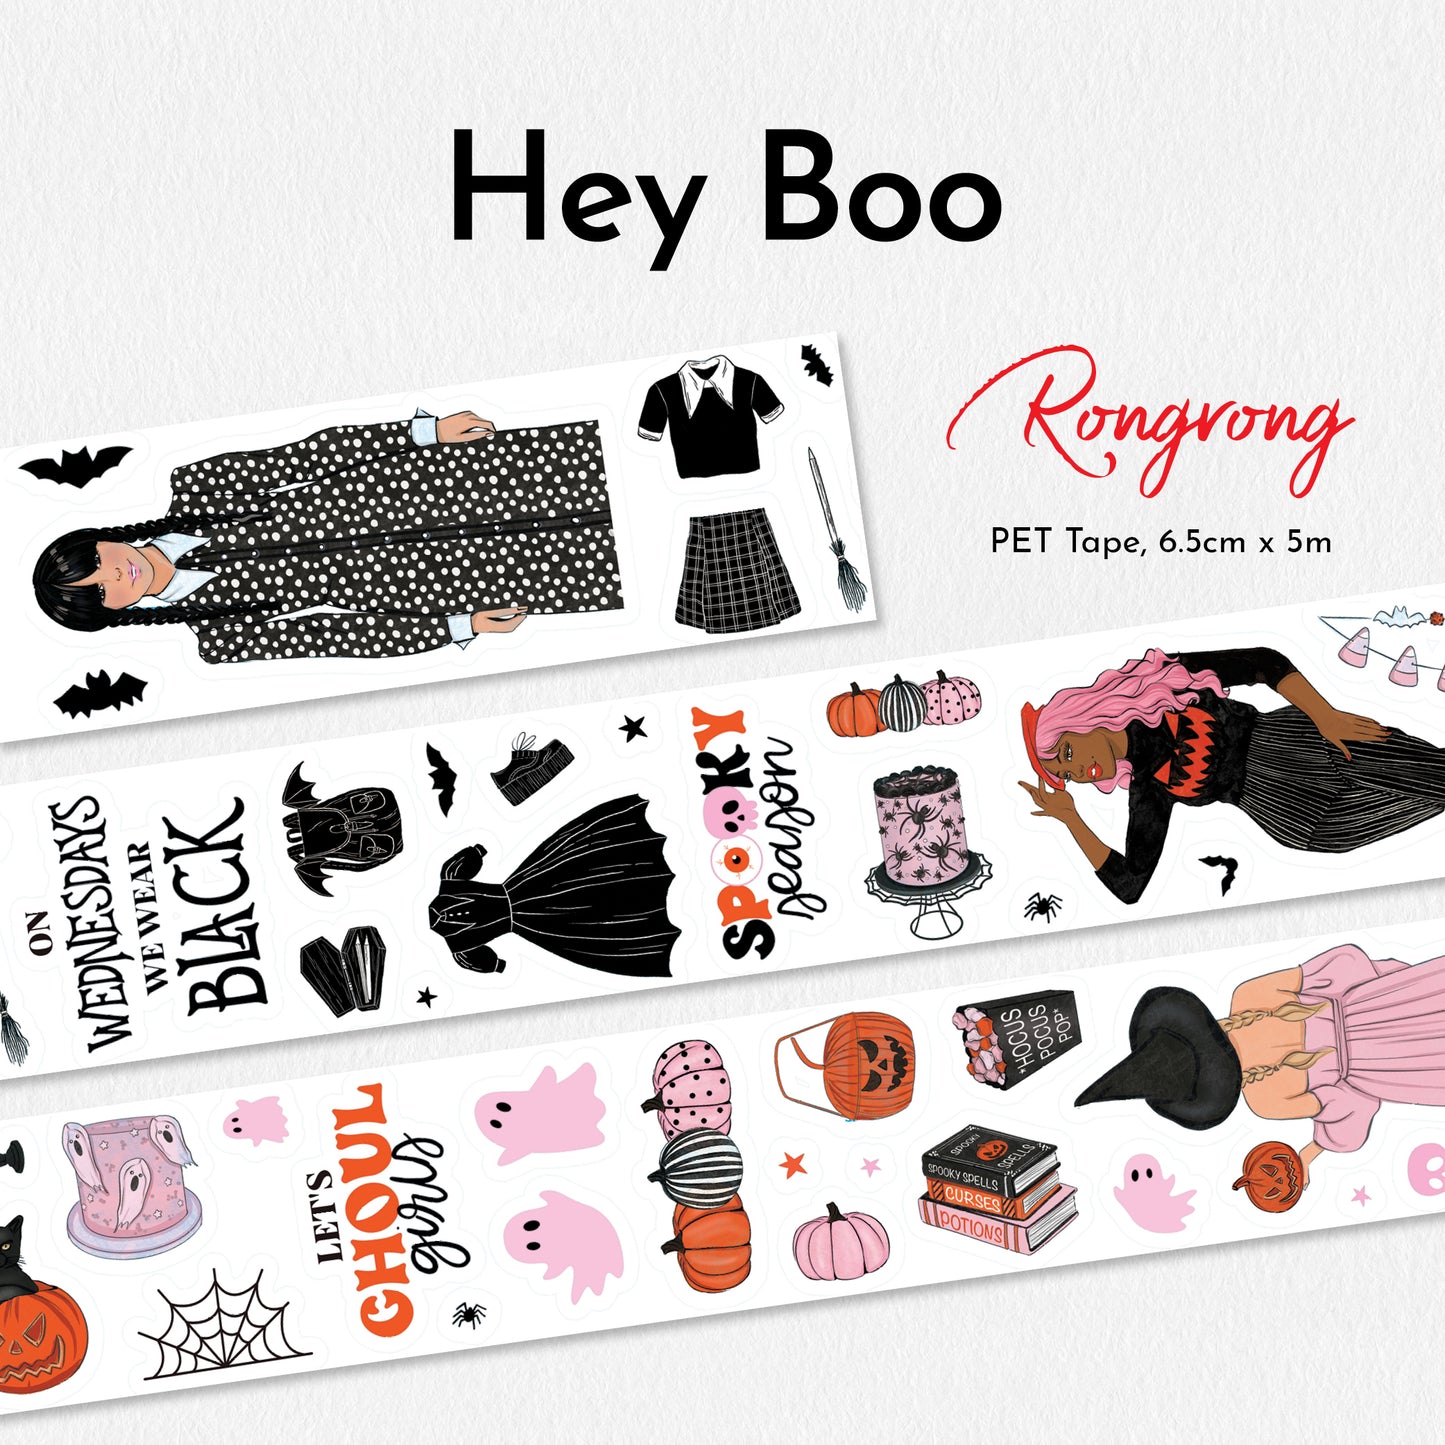 Rongrong: "Hey Boo" PET tape